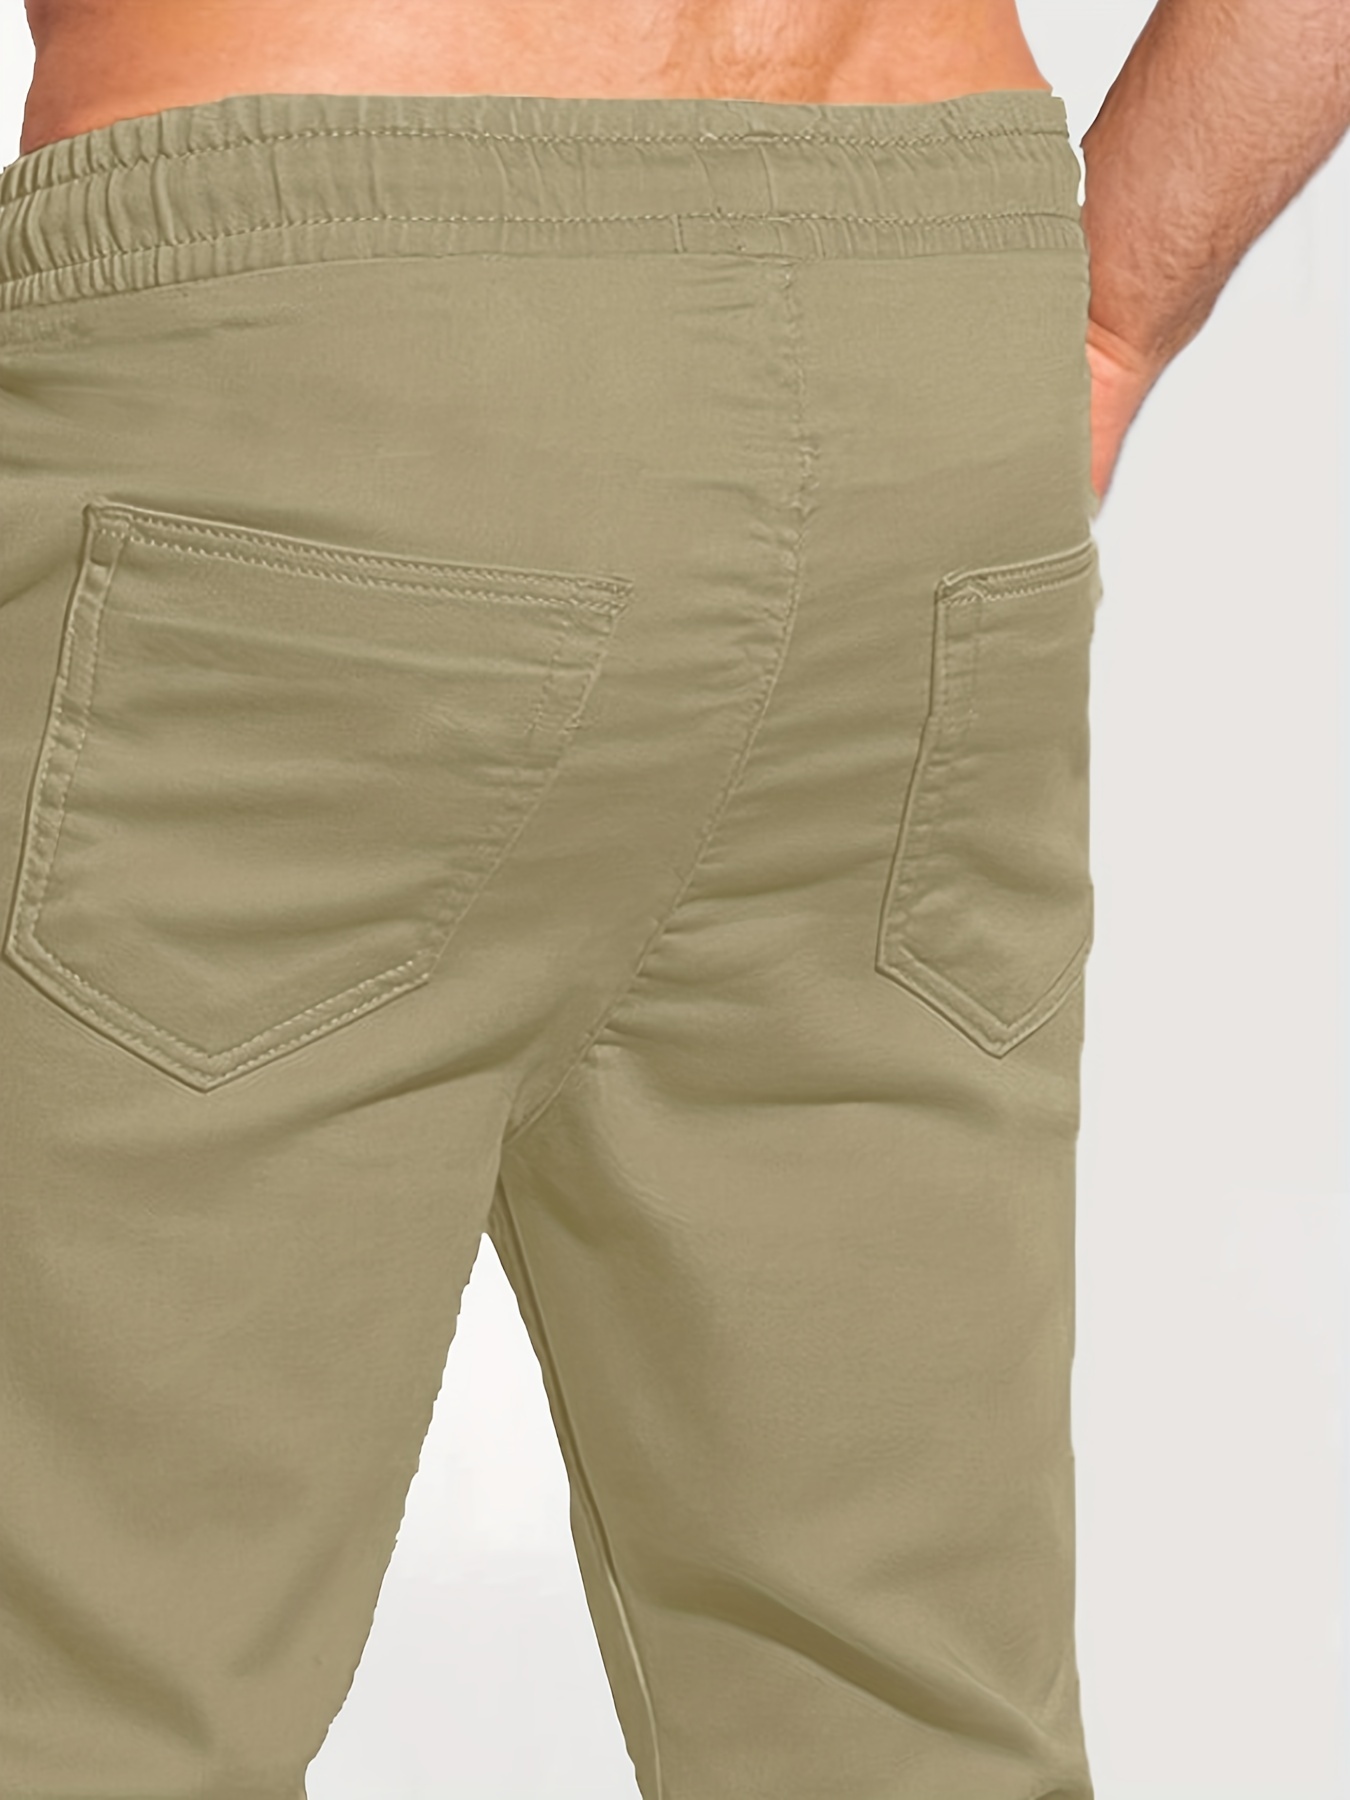 Item 957065 - Outdoor Research Astro Pant - Men's Casual Pants